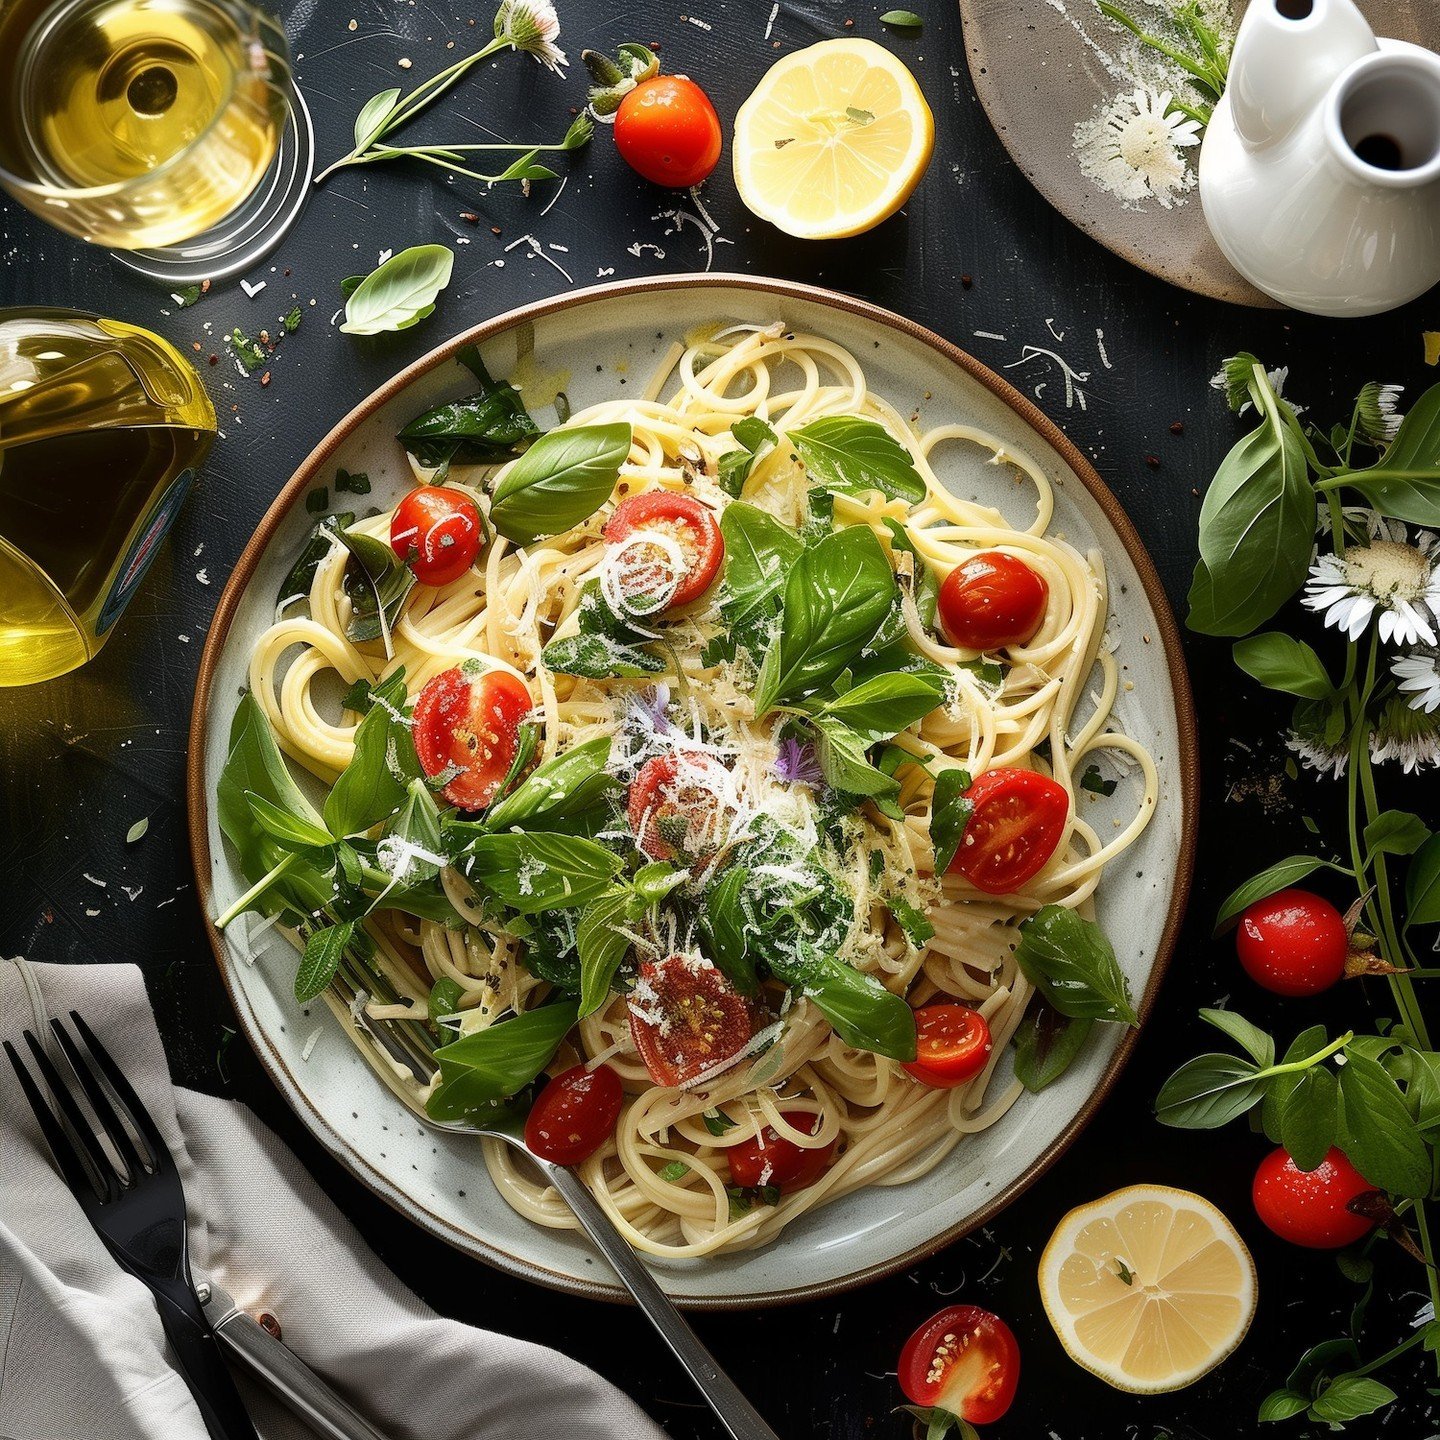 We have a new recipe on our holistic cooking blog.  A summer treat that supports oral health and fitness goals. 

https://www.midwestbiohealth.com/holistic-cooking/spring-garden-pasta-with-lemon-herb-vinaigrette

 #foodiegram #newrecipe #oralhealth #